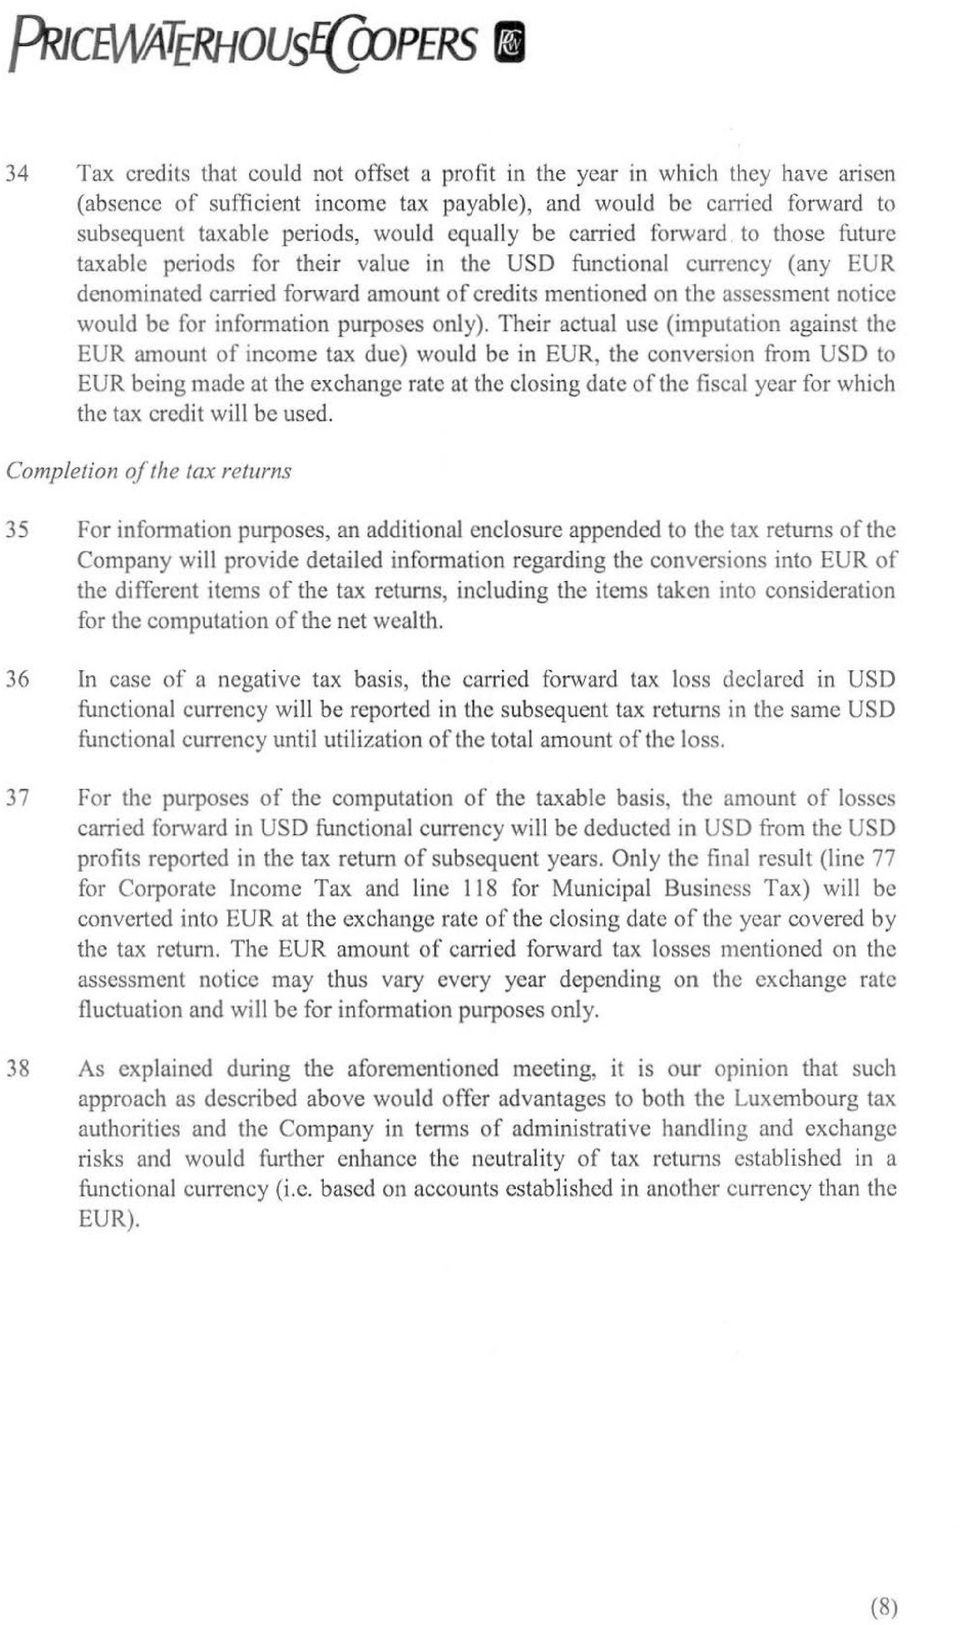 to those future taxable periods for their value in the USO functional currency (any EUR denominated carried forward amount of credits mentioned on the assessment notice would be for information